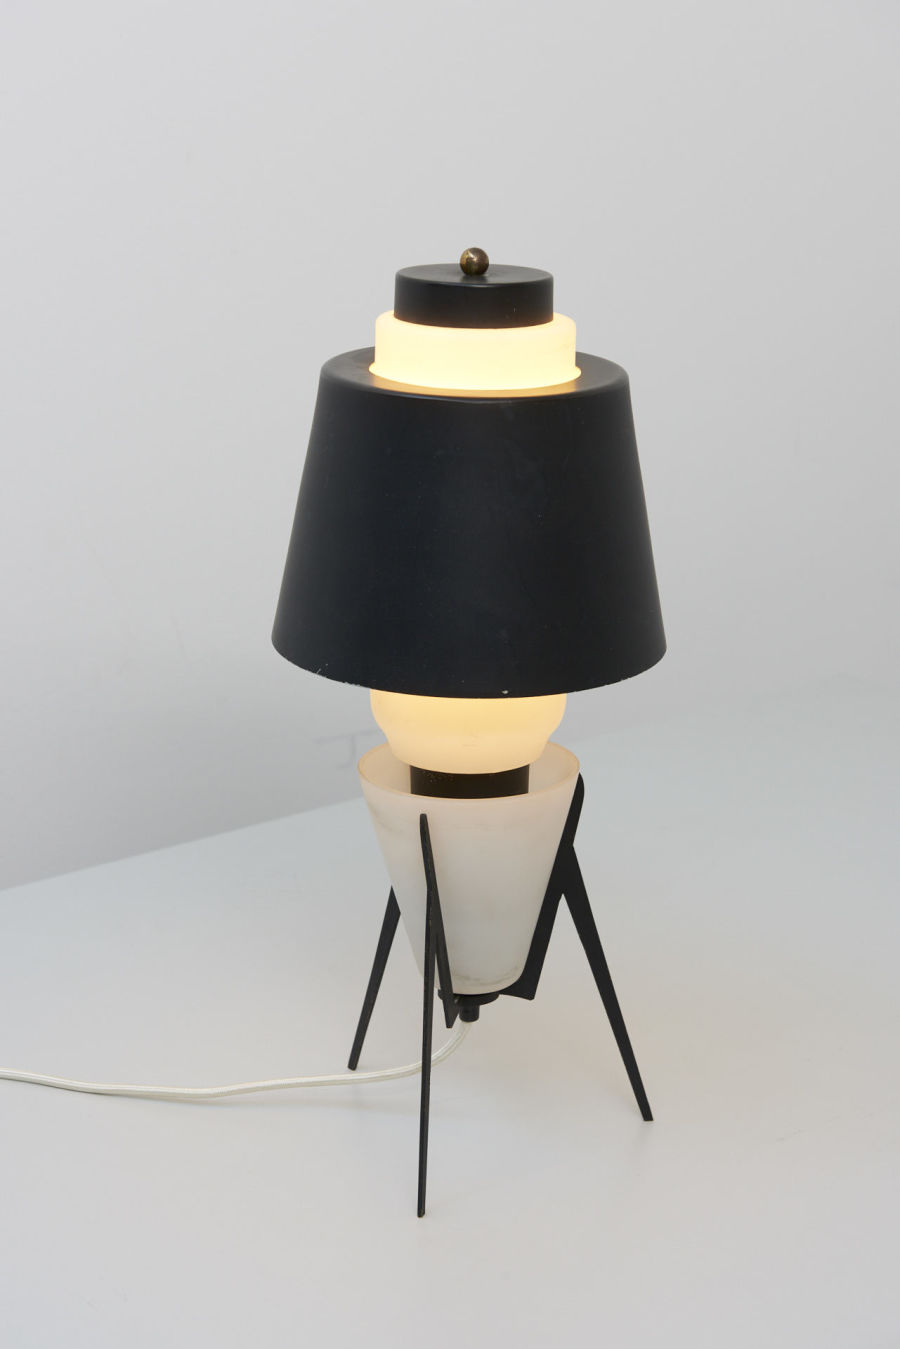 modestfurniture-vintage-2435-table-lamp-italy-glass-black-shade02